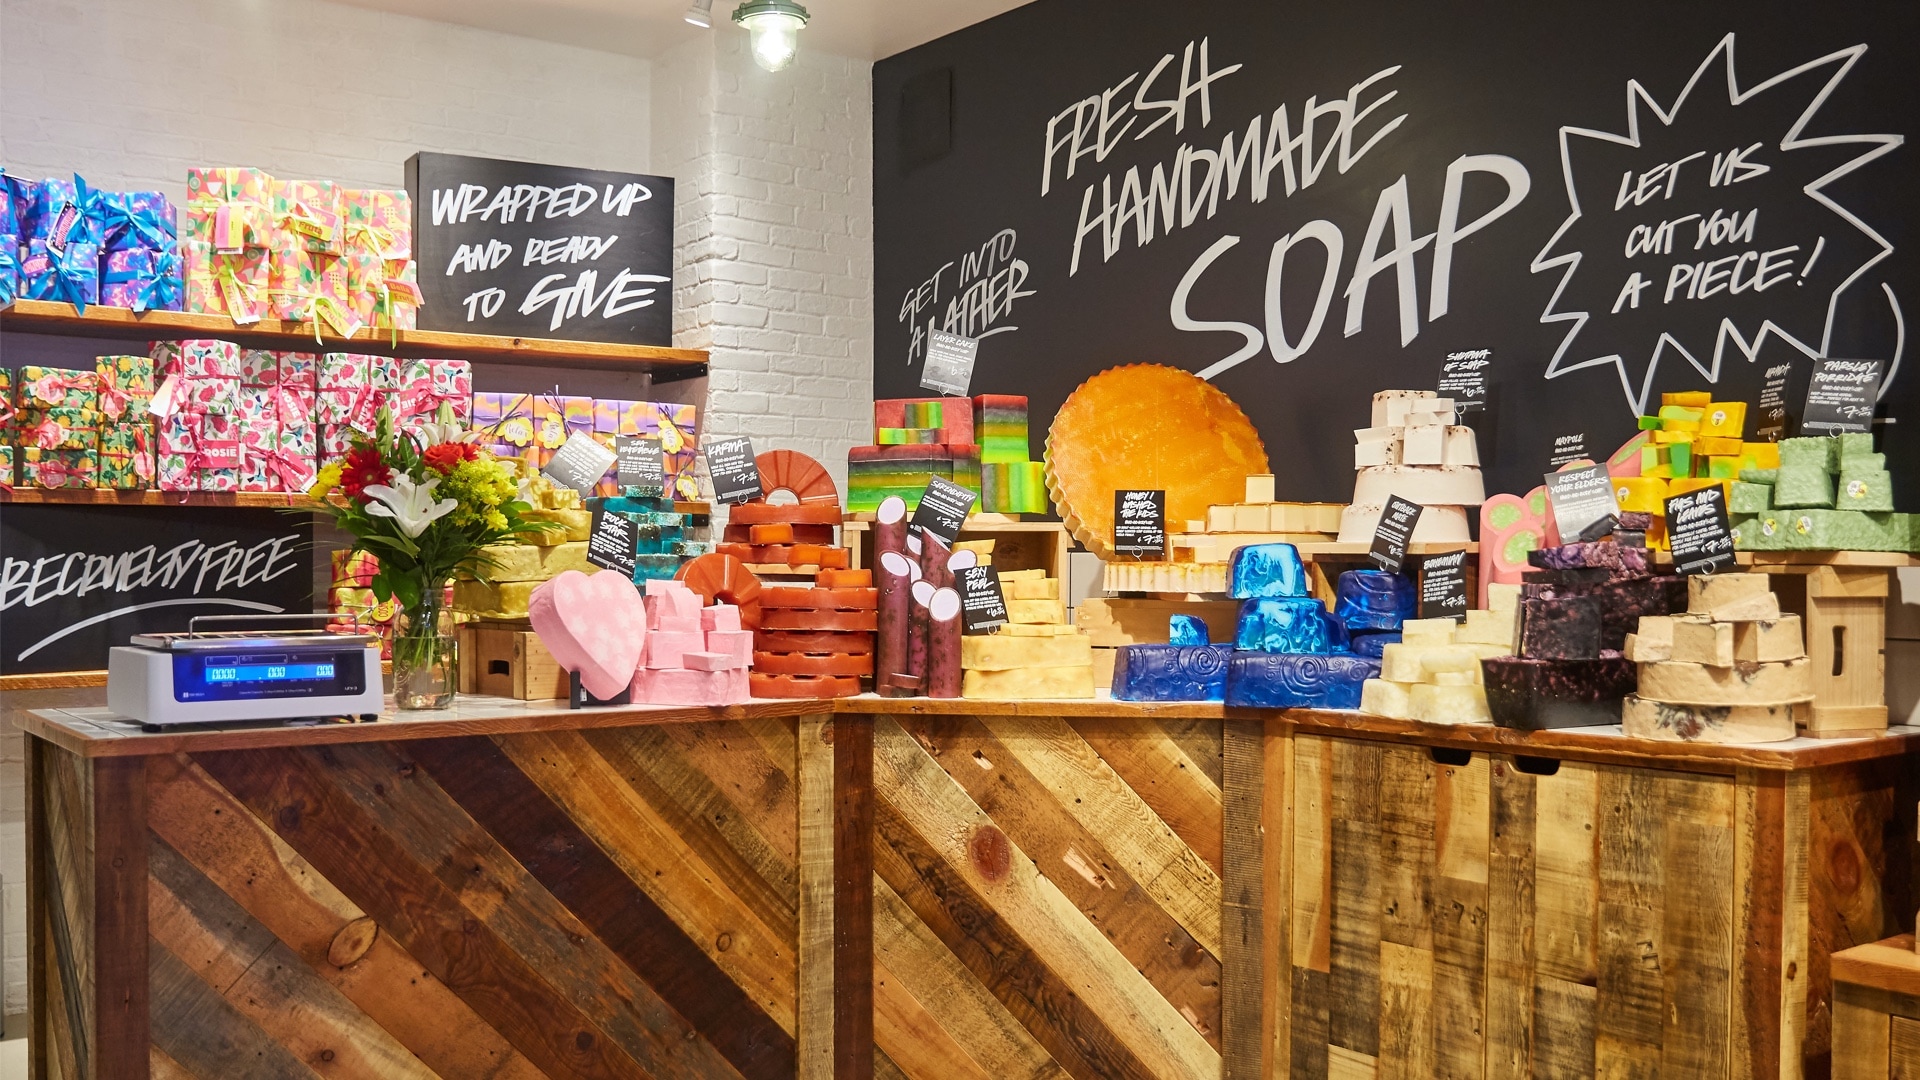 Against a corner of a LUSH store is a large chalkboard sign that says "Fresh Handmade Soap" and in smaller letters "Let us cut you a piece" and on a table sites various colours and sizes of LUSH handmade soaps